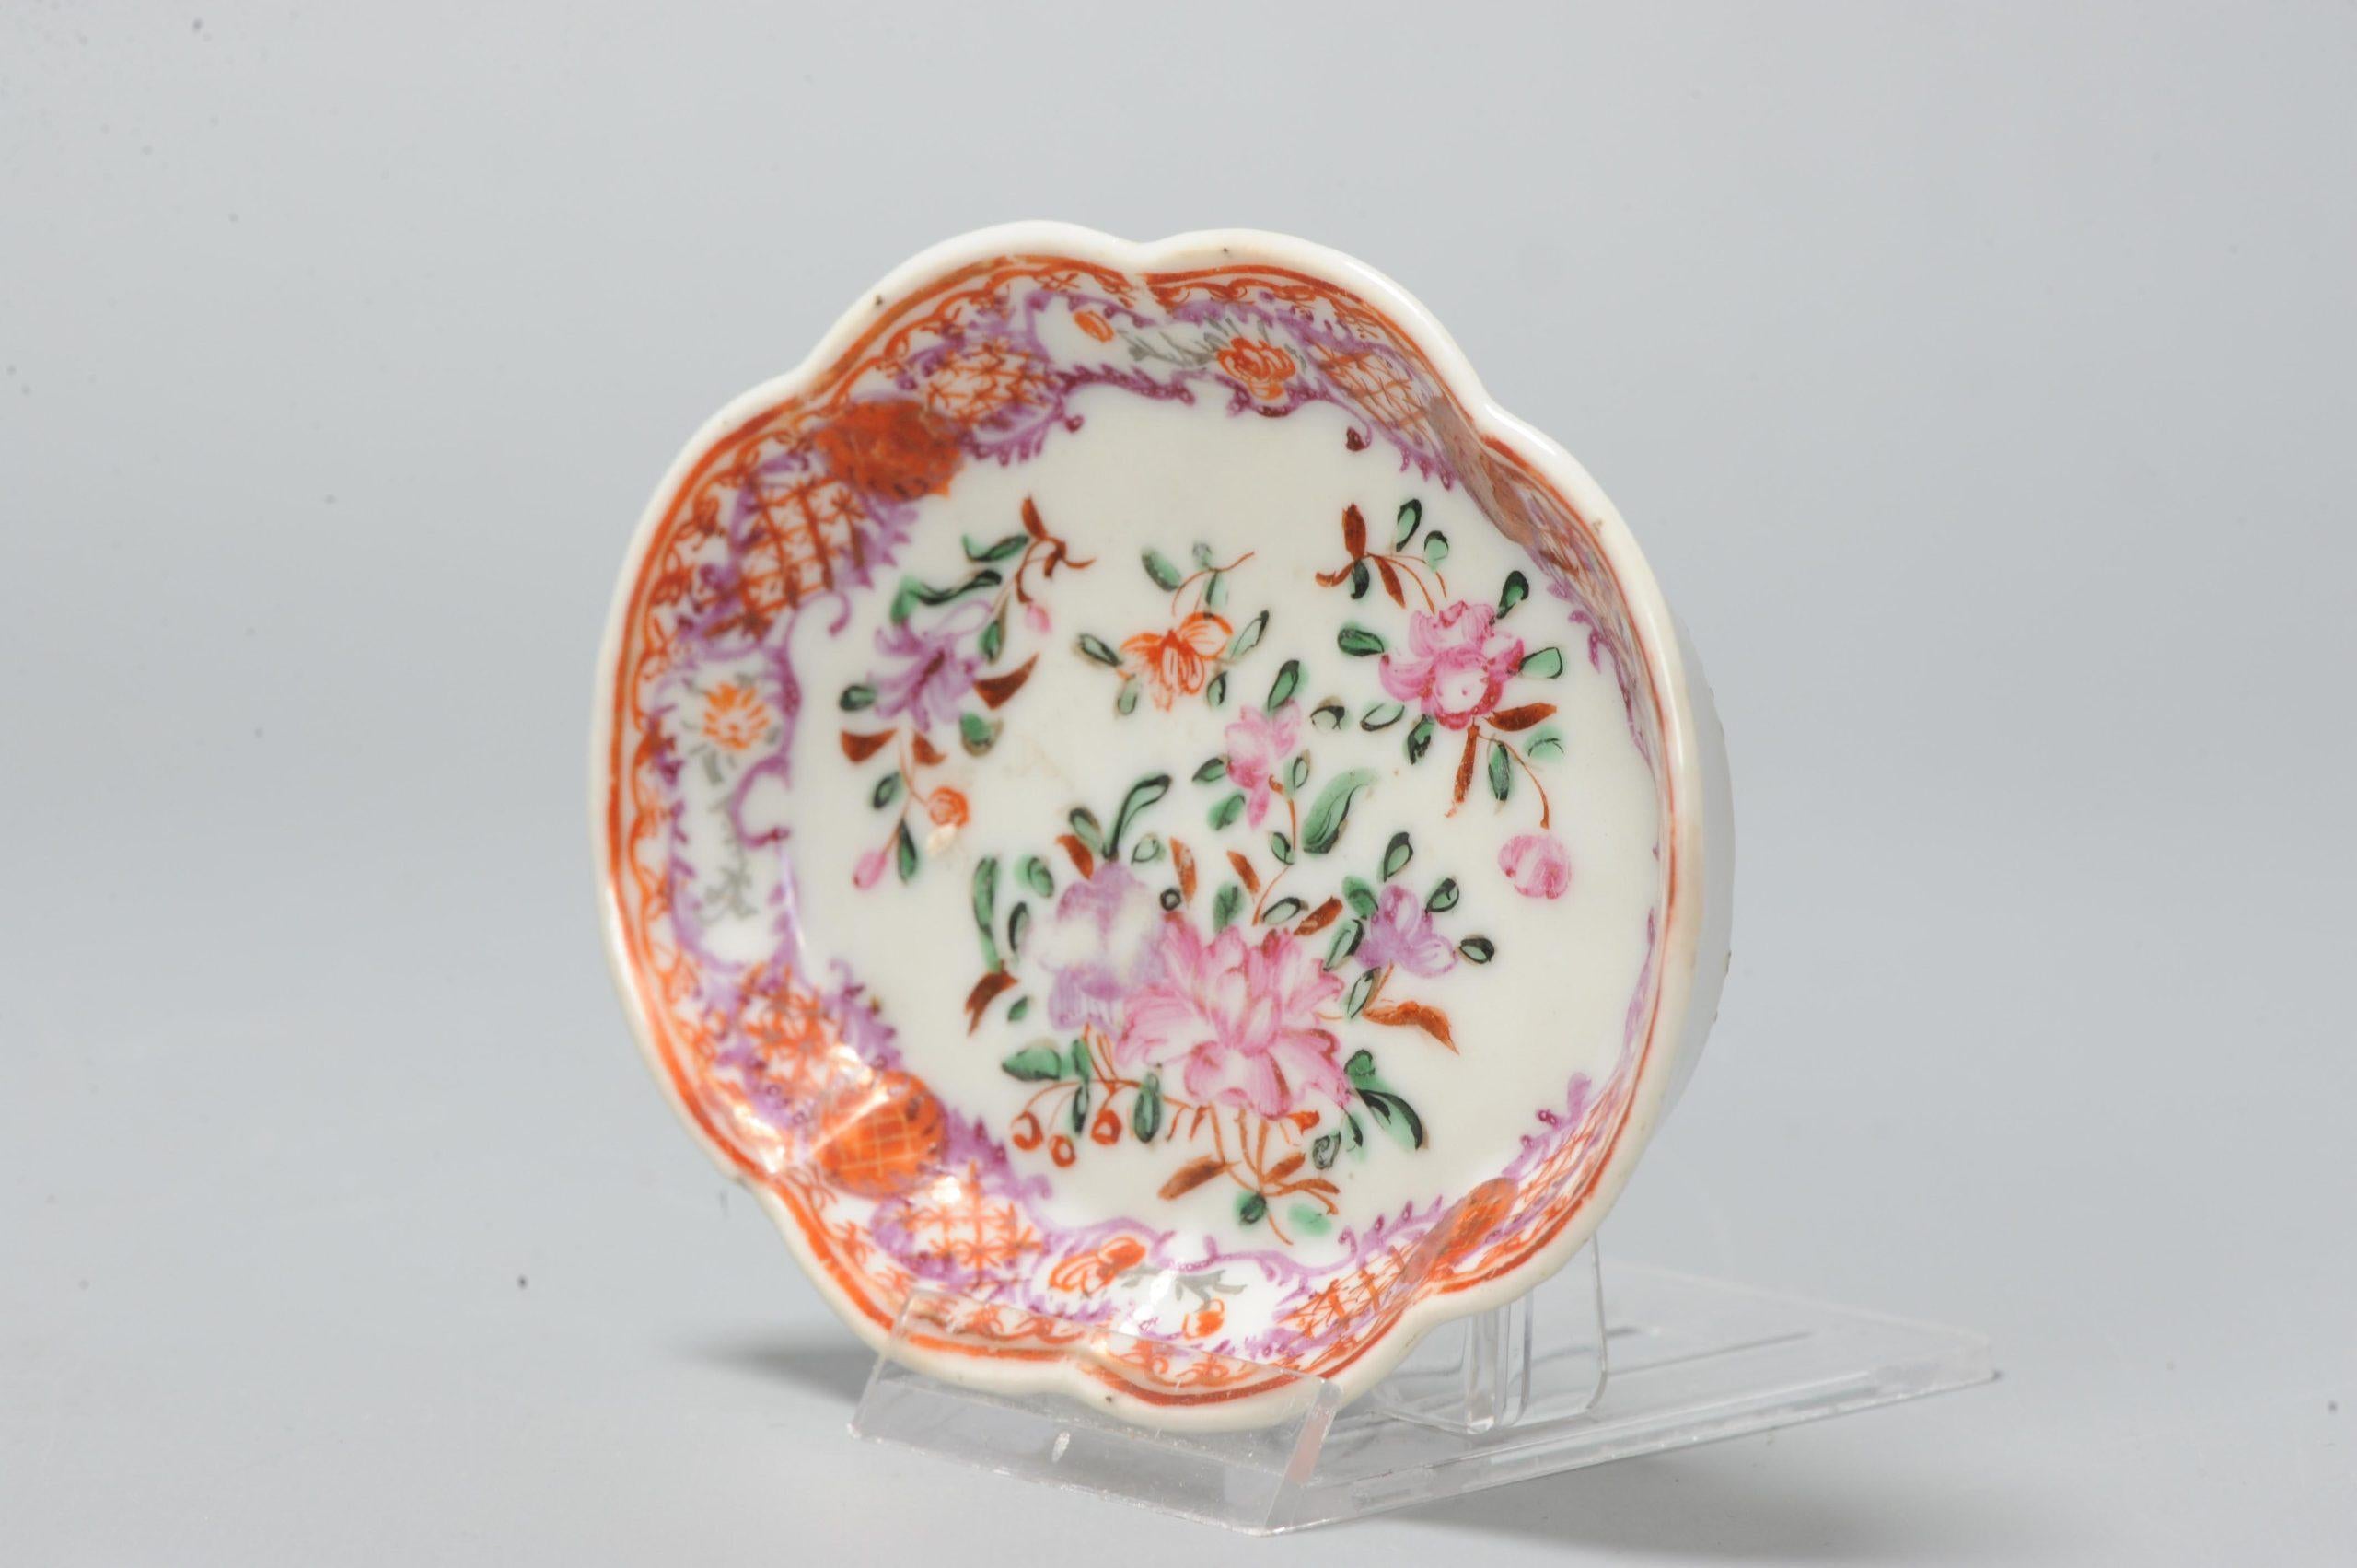 Nice example, high quality paintwork, Full and beautiful decoration.

Additional information:
Material: Porcelain & Pottery
Type: Plates
Region of Origin: China
Age: Pre-1800
Period: 18th century Qing (1661 - 1912)
Original/Reproduction: